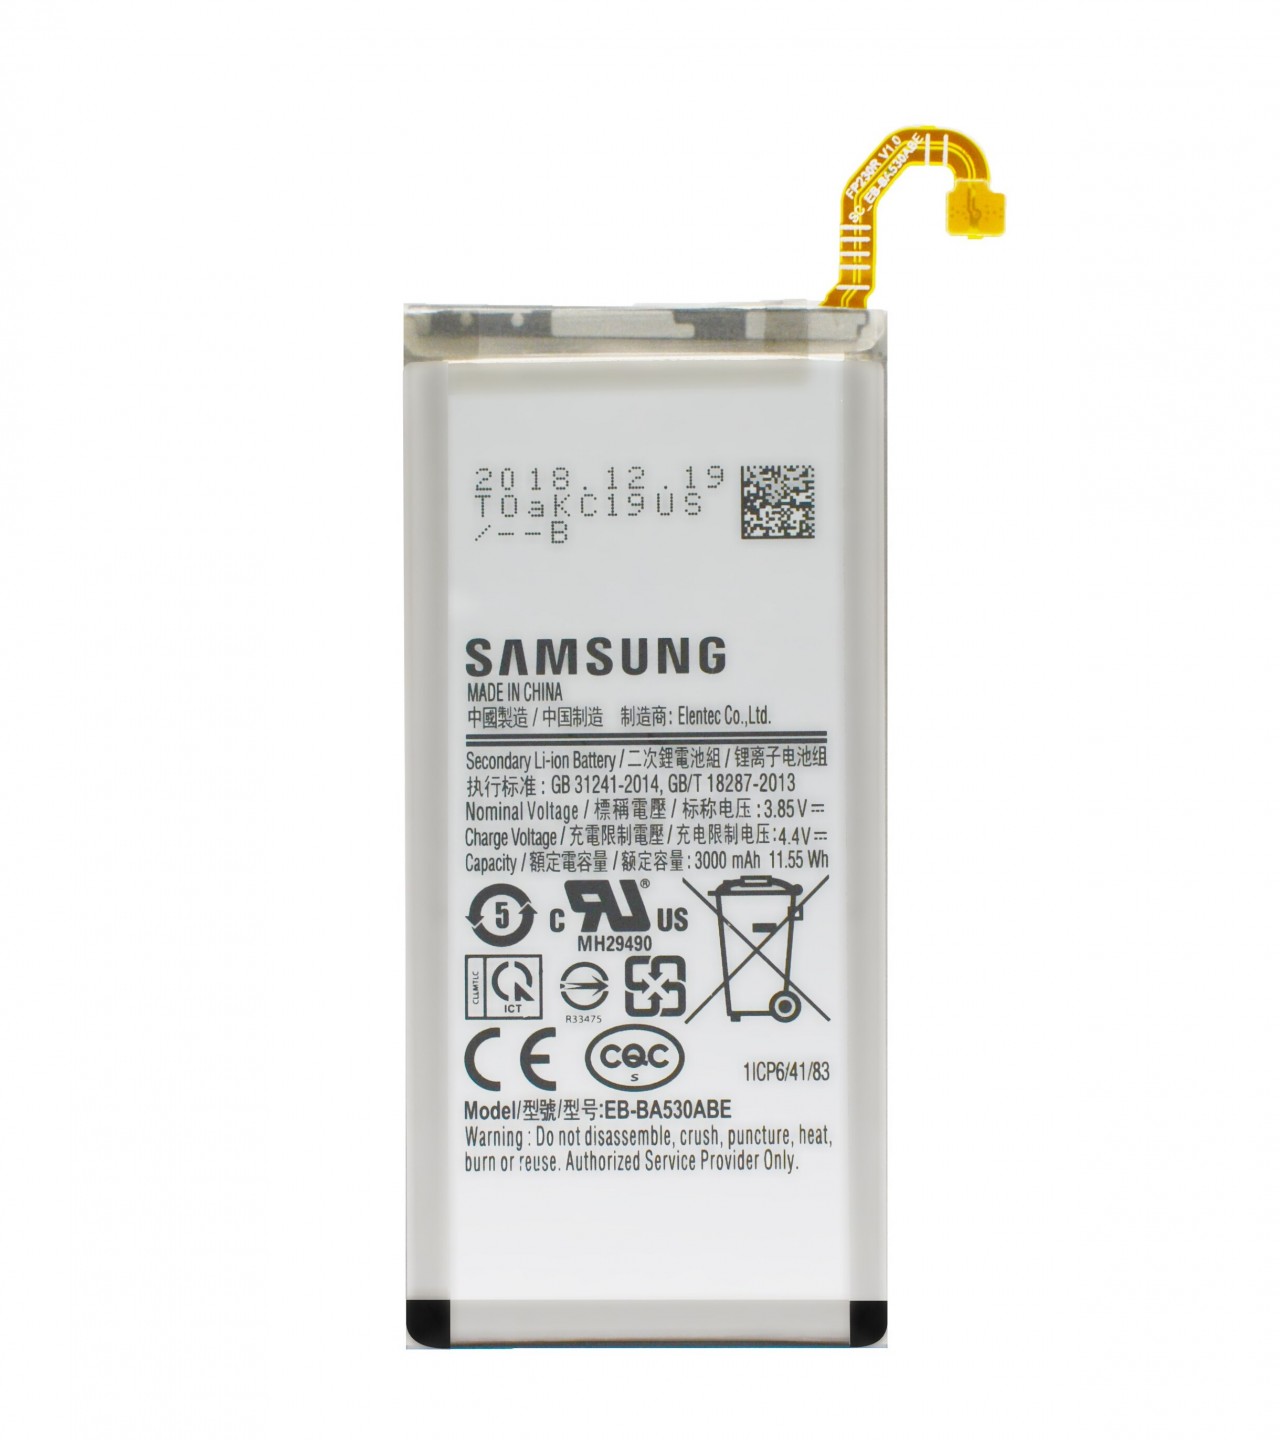 Samsung Galaxy A8 2018 Battery Replacement 3000mAh Capacity_ Silver